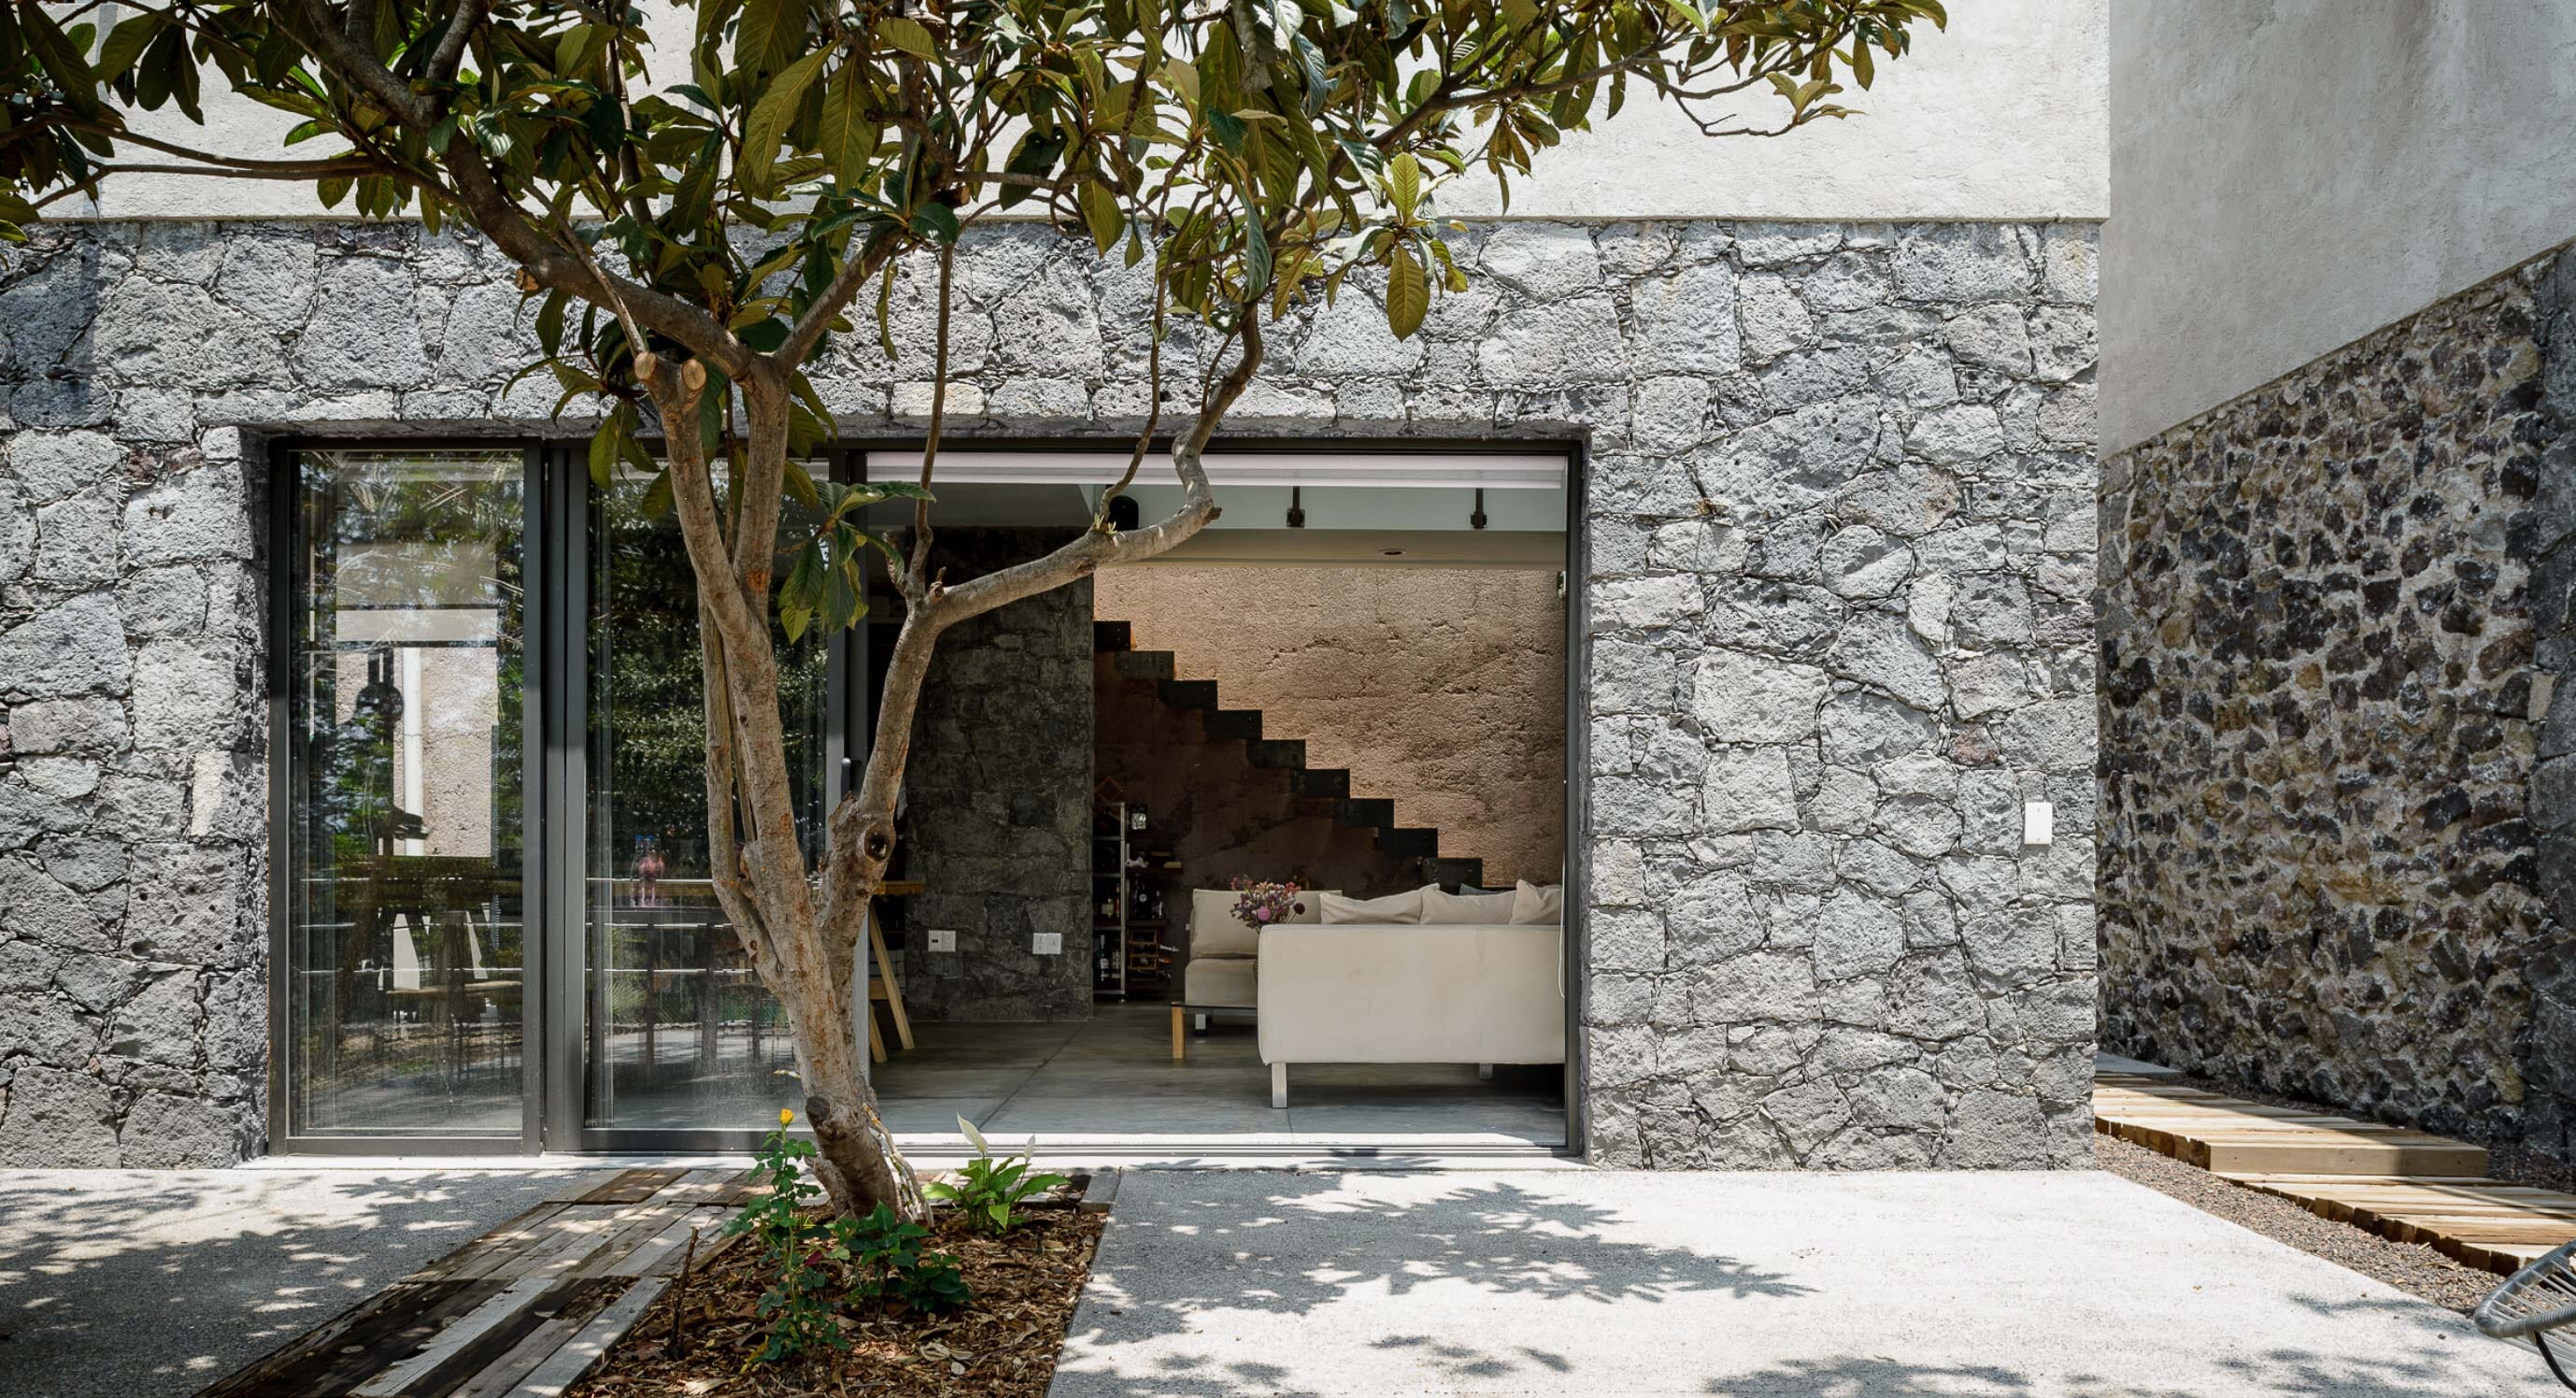 At One With Nature: The La Pancha House